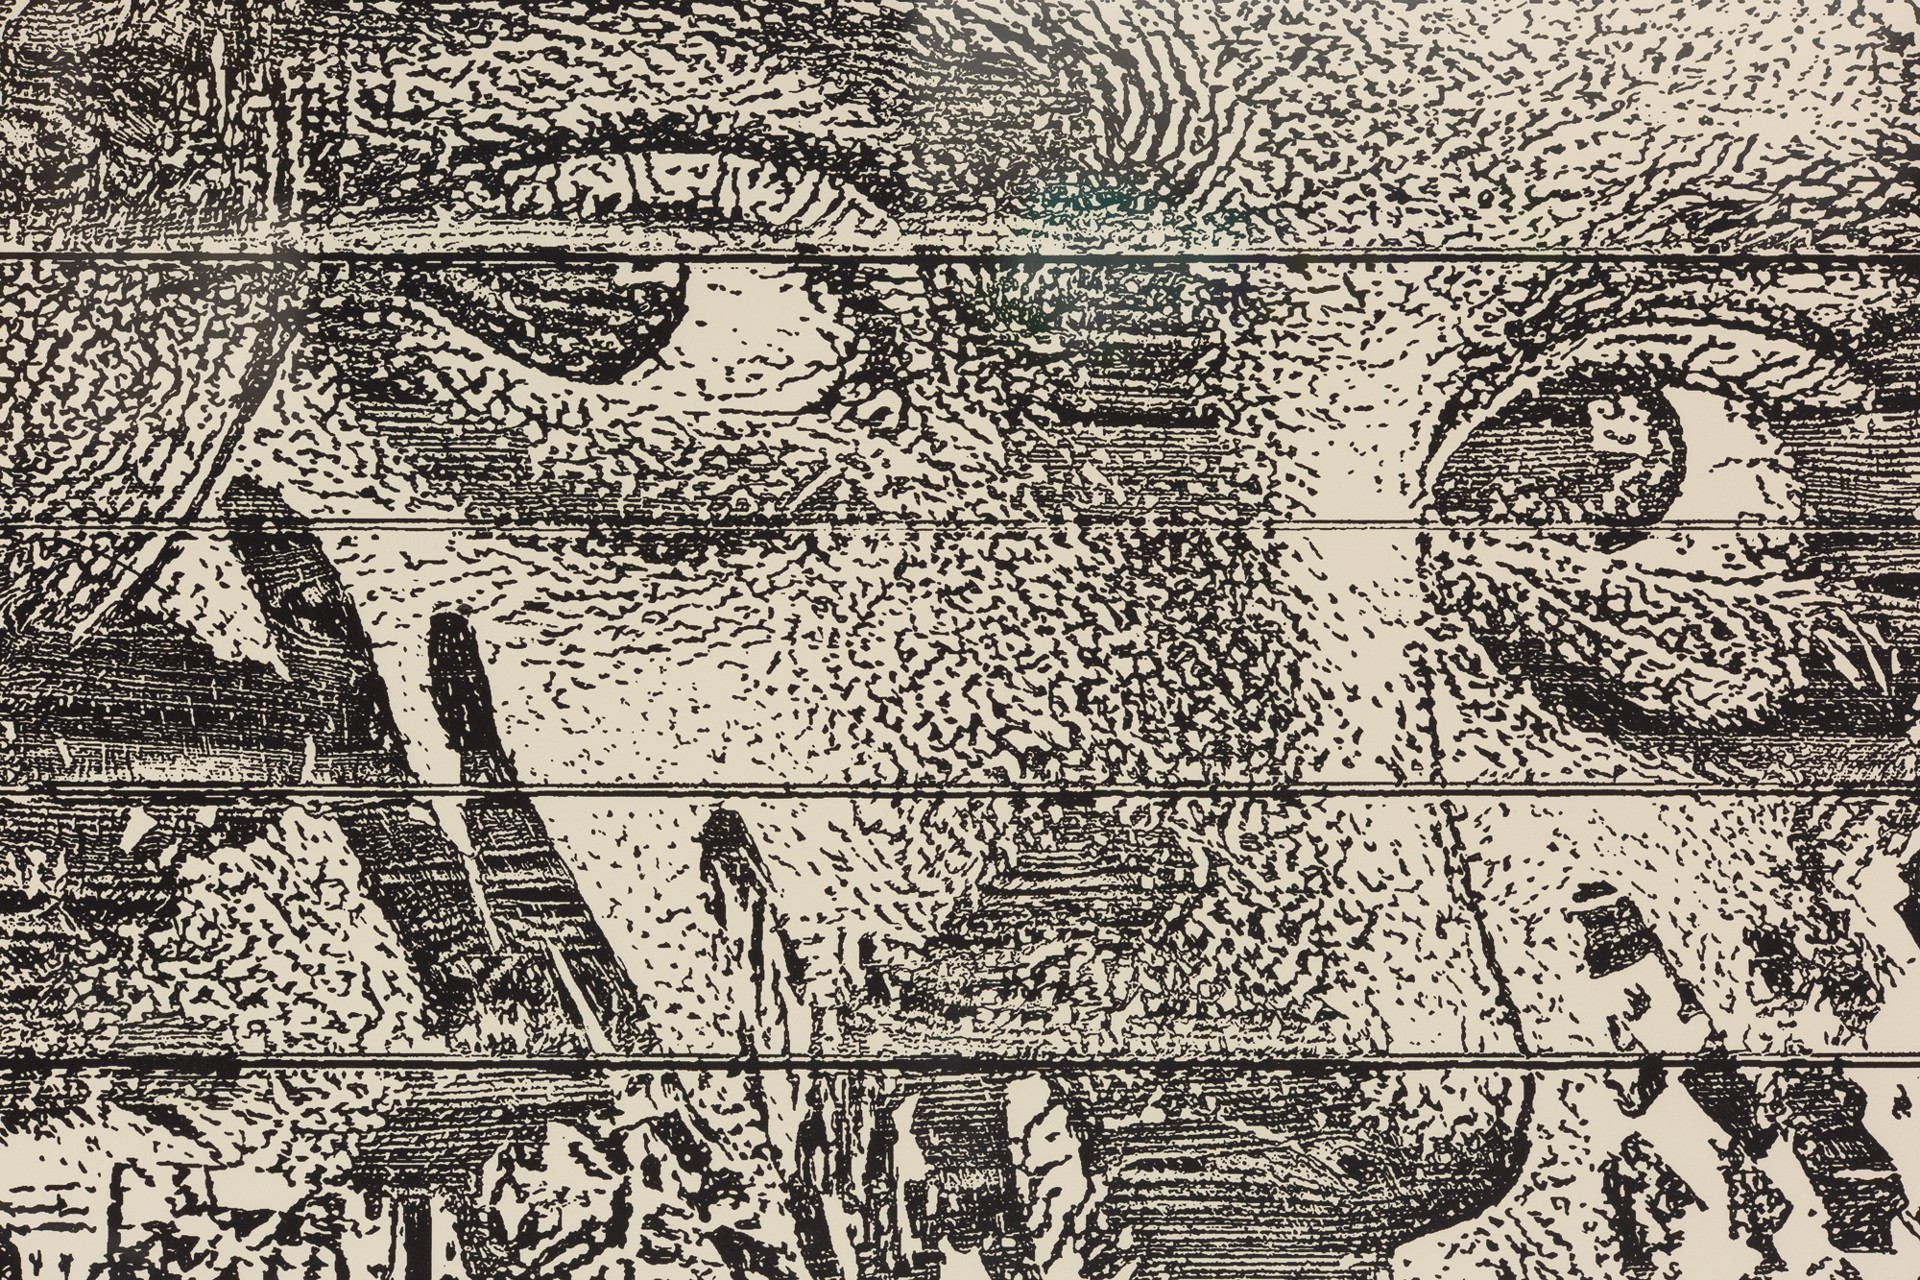 Woodcut by Vhils